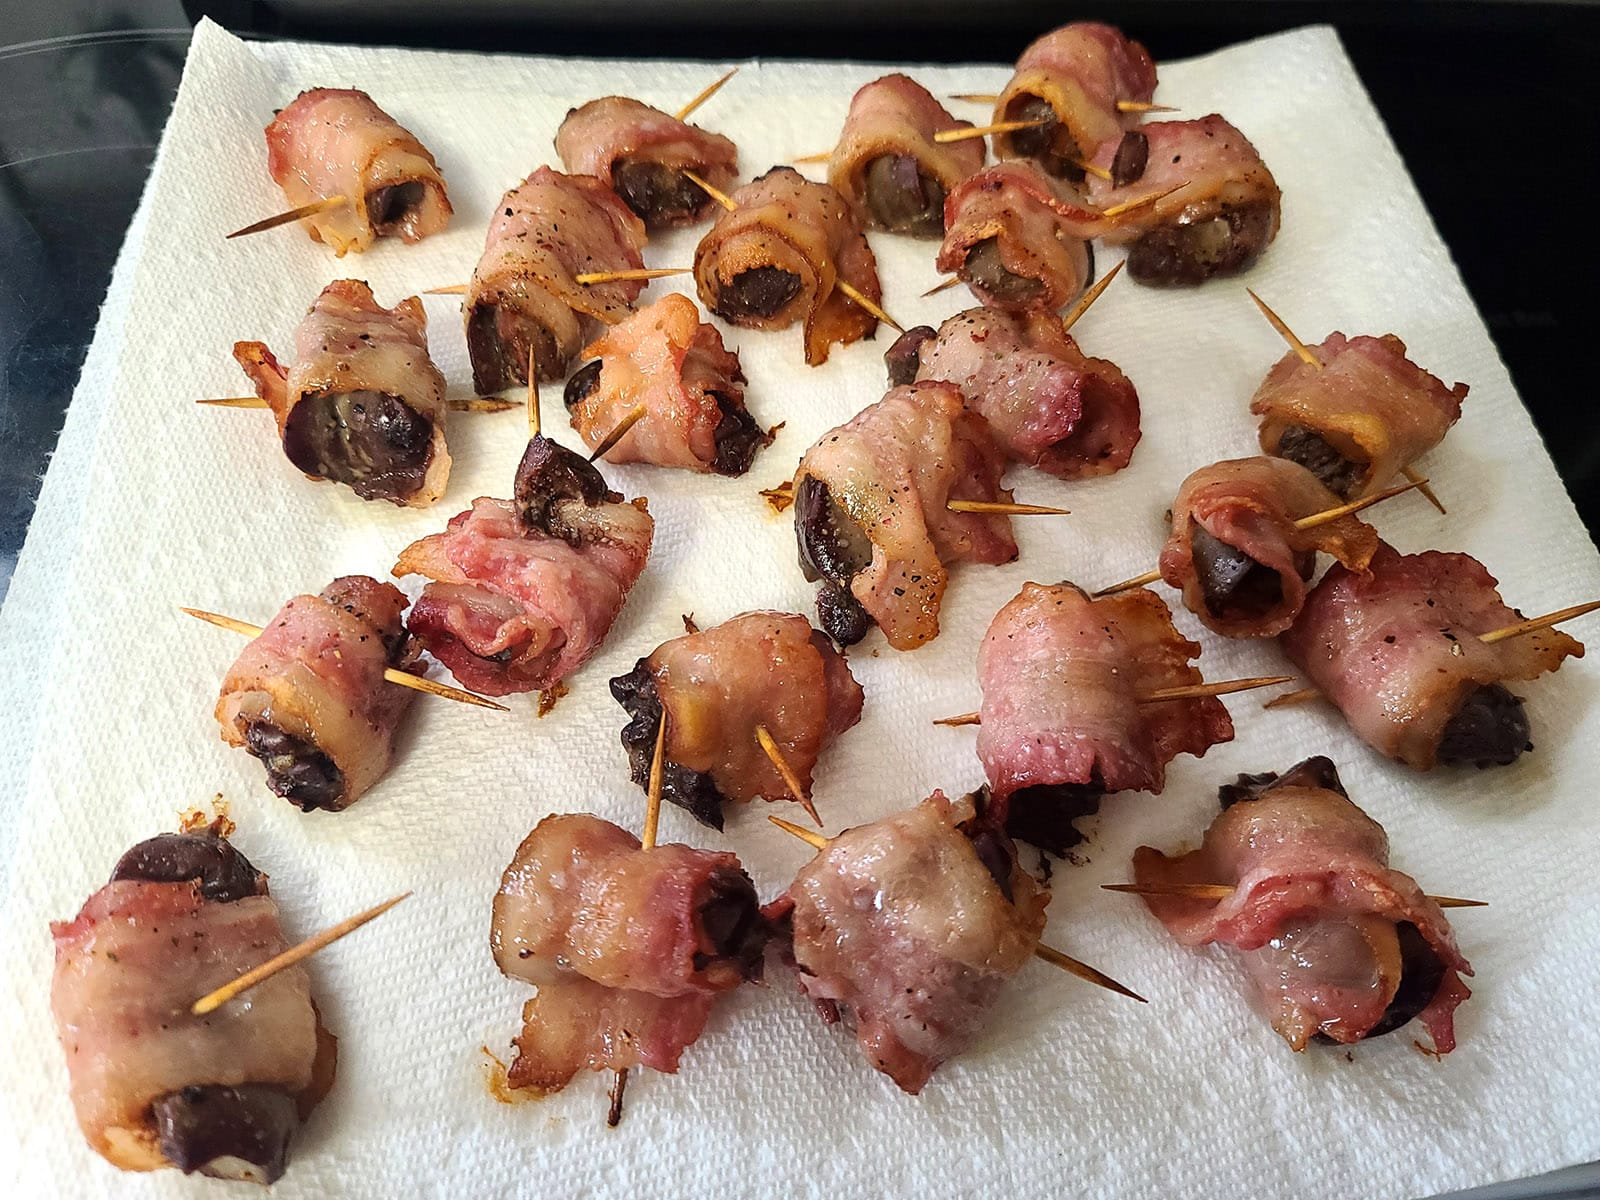 20 or so bacon wrapped chicken livers on paper towels.